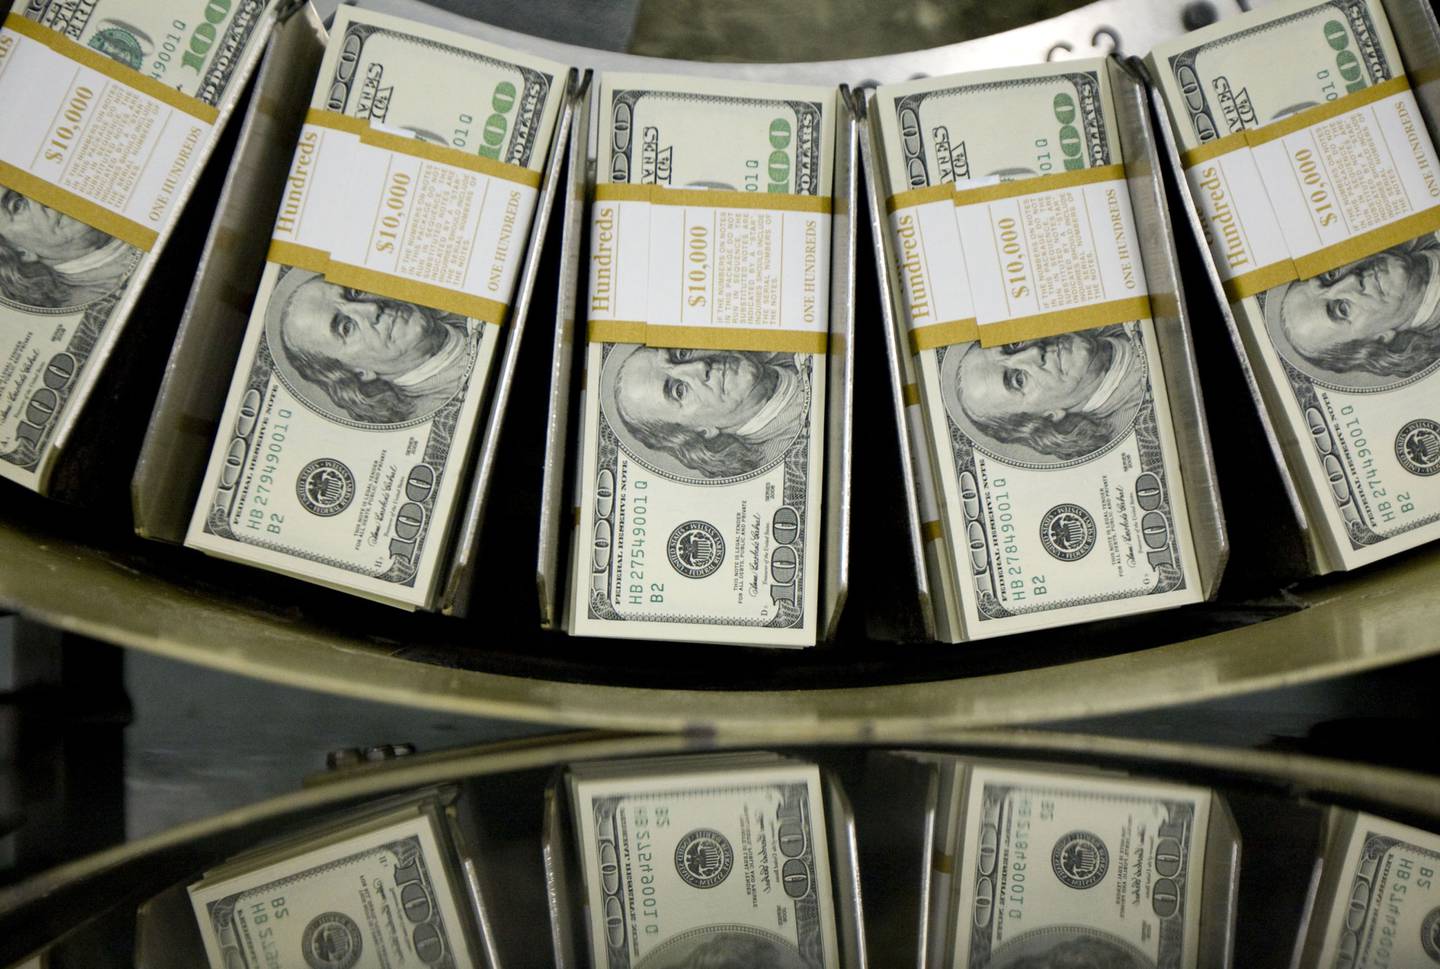 Stacks of one hundred dollar bills pass through a circulator machine at the Bureau of Engraving and Printing in Washington, D.C., U.S., on Wednesday, Oct. 14, 2009.